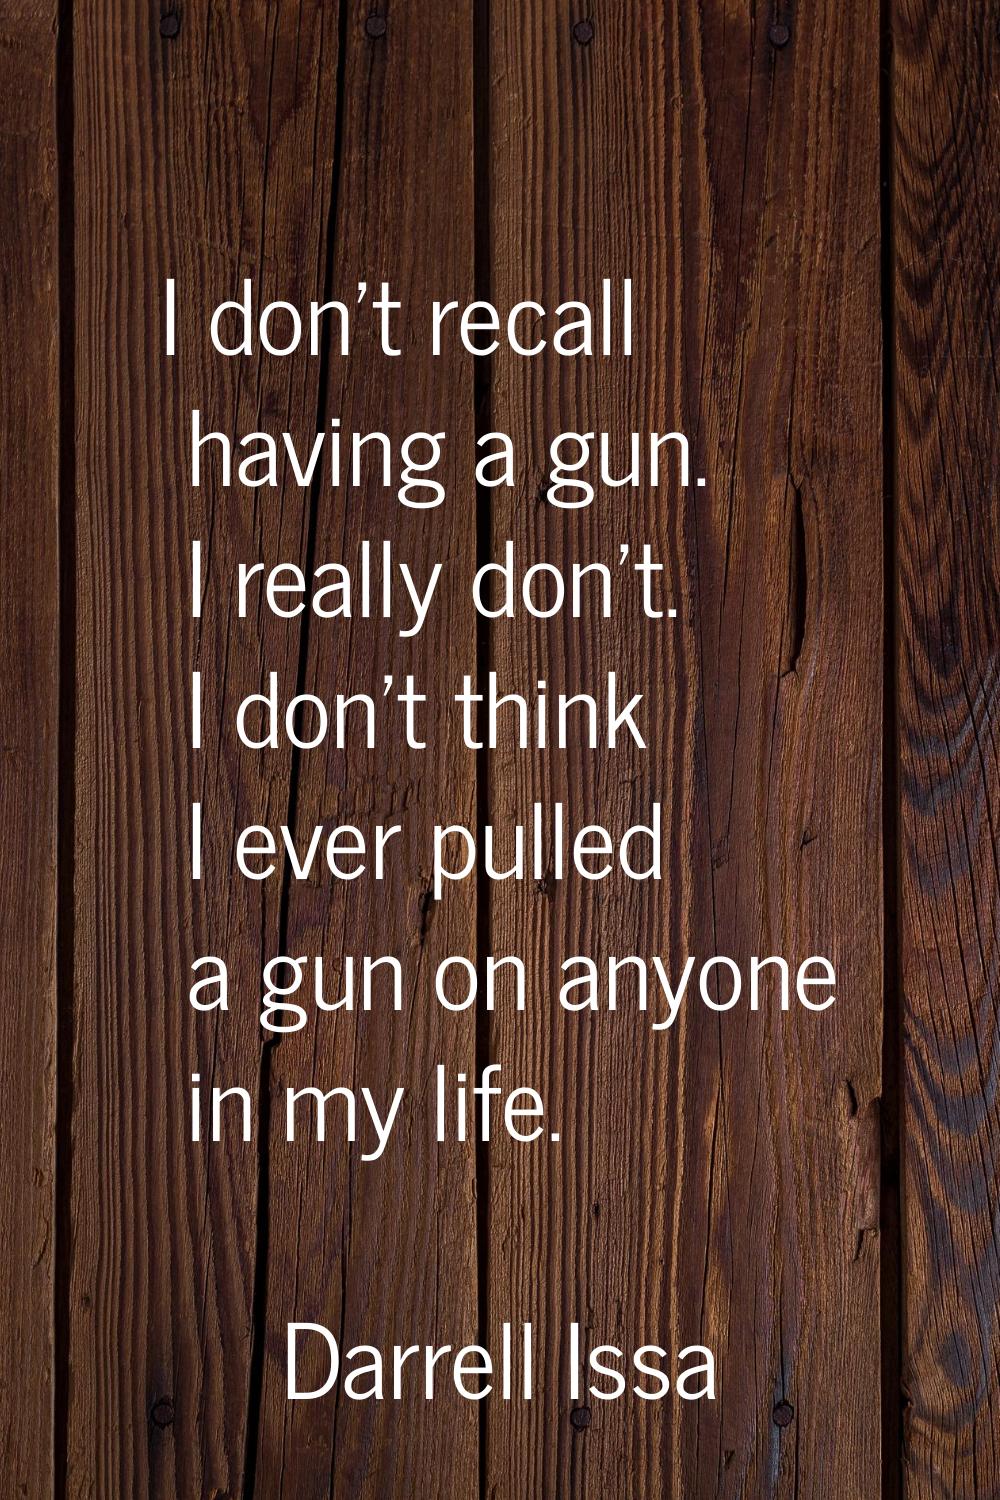 I don't recall having a gun. I really don't. I don't think I ever pulled a gun on anyone in my life